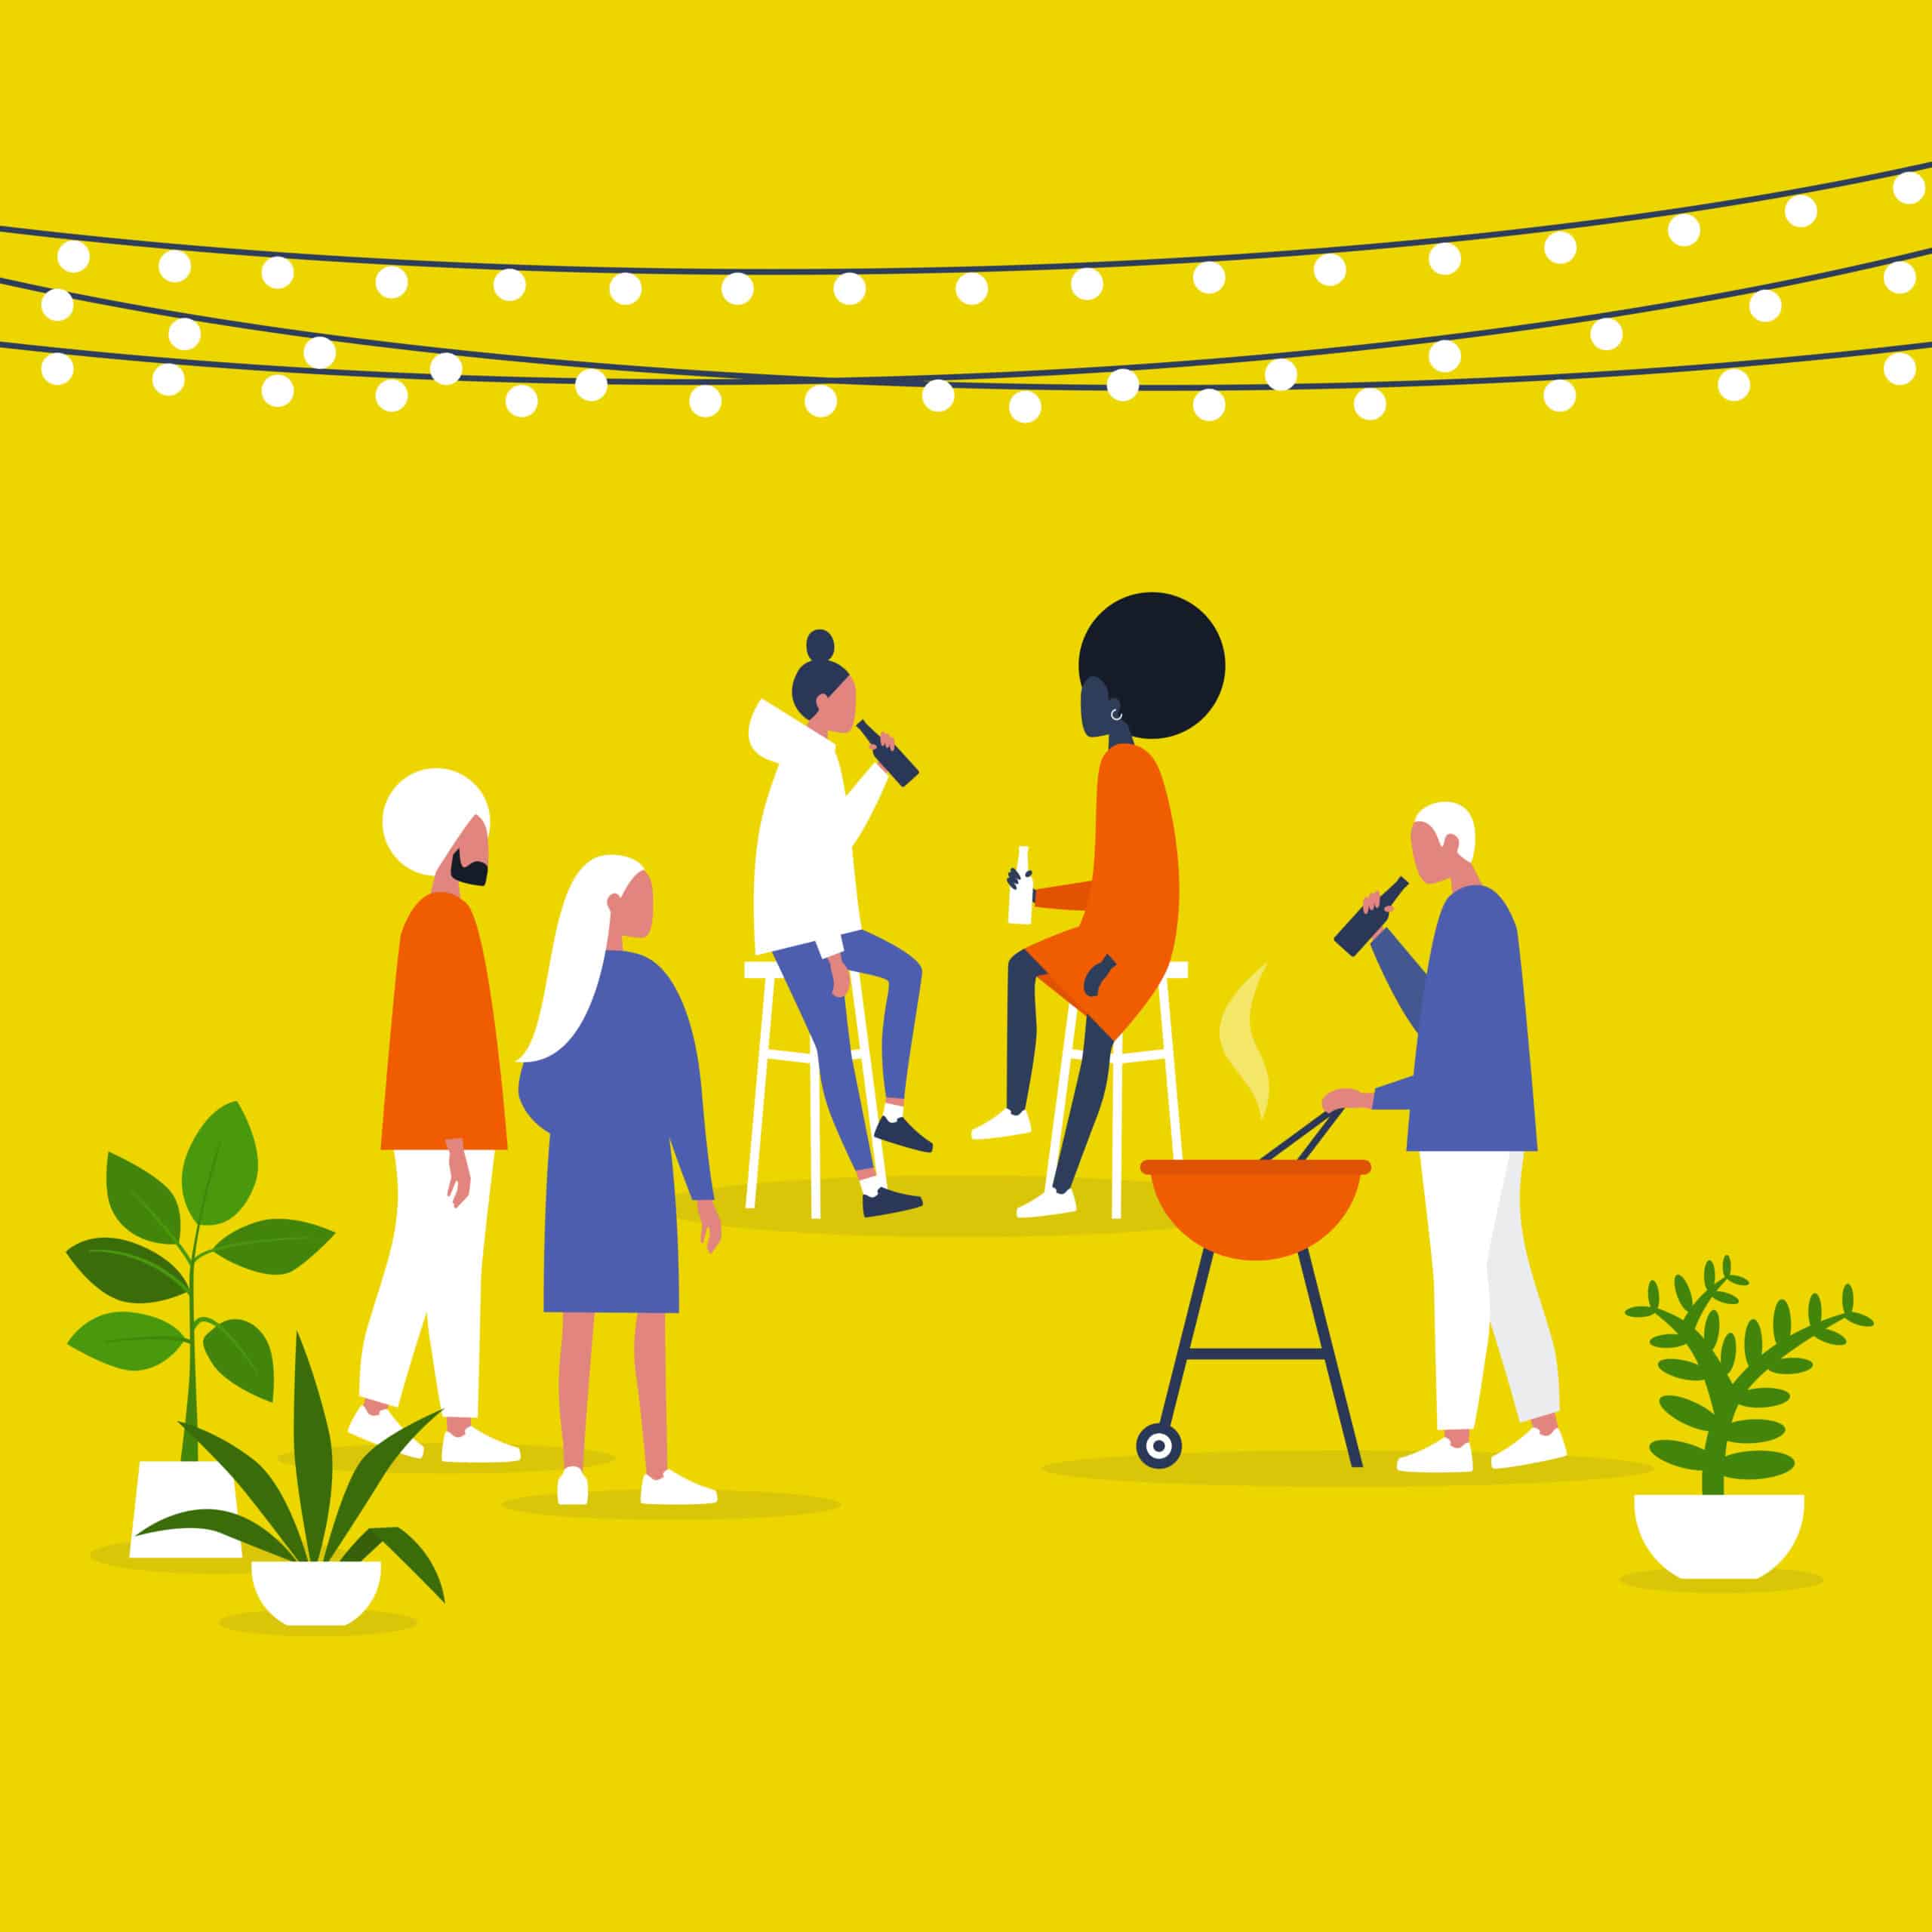 Party scene with characters holding drinks and at a bbq, yellow background with plants around and string lights